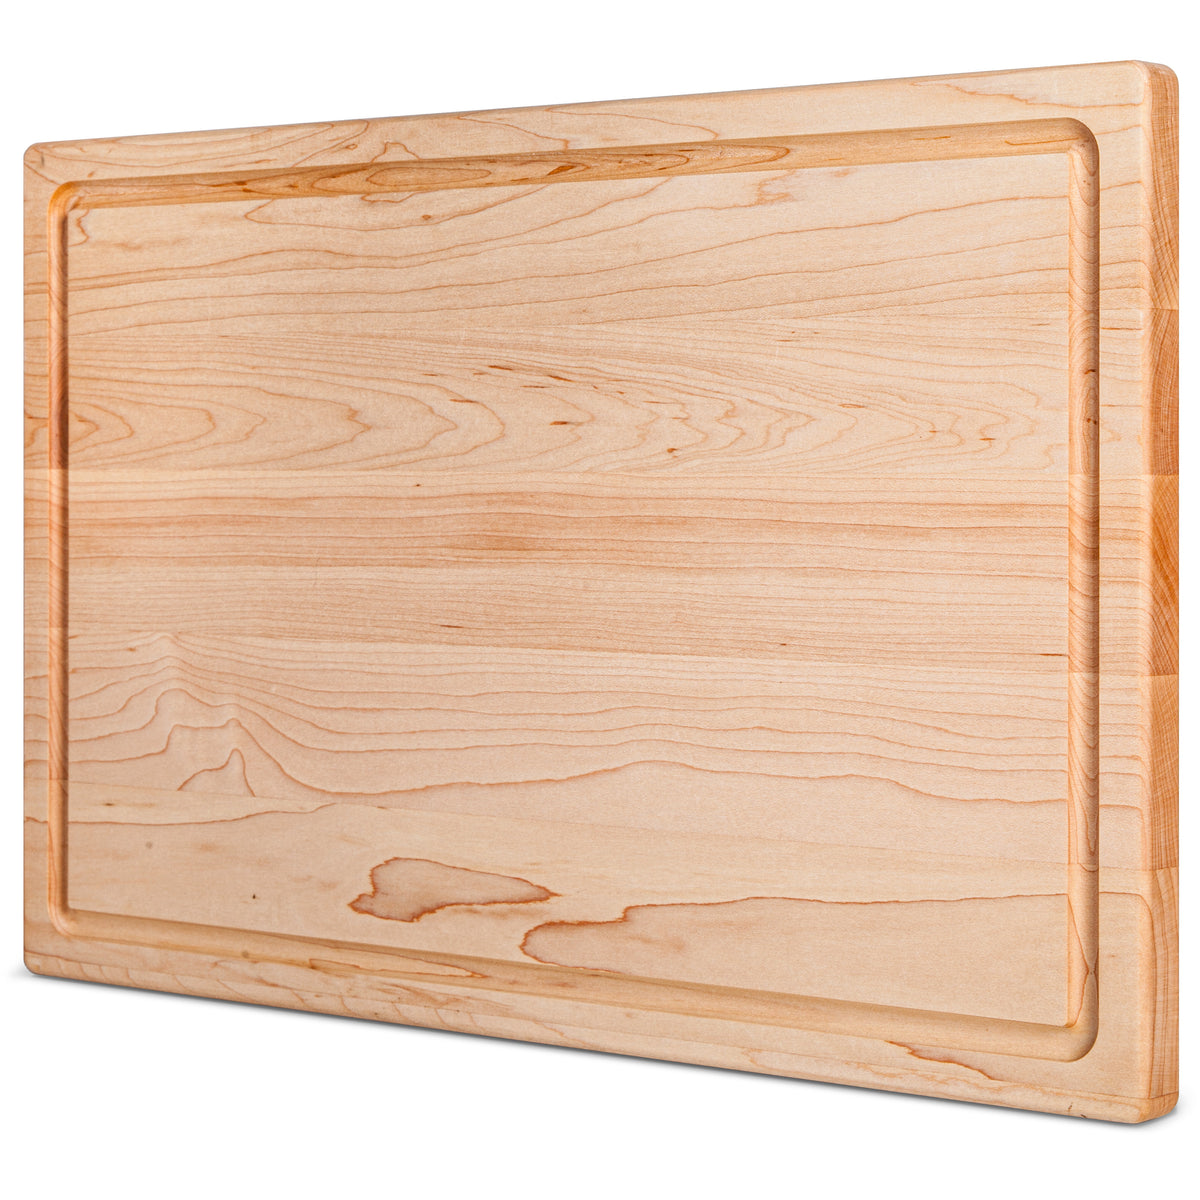 Flat Grain Maple Cutting Board with Juice Grooves 17x11x0.75 - Mevell.com